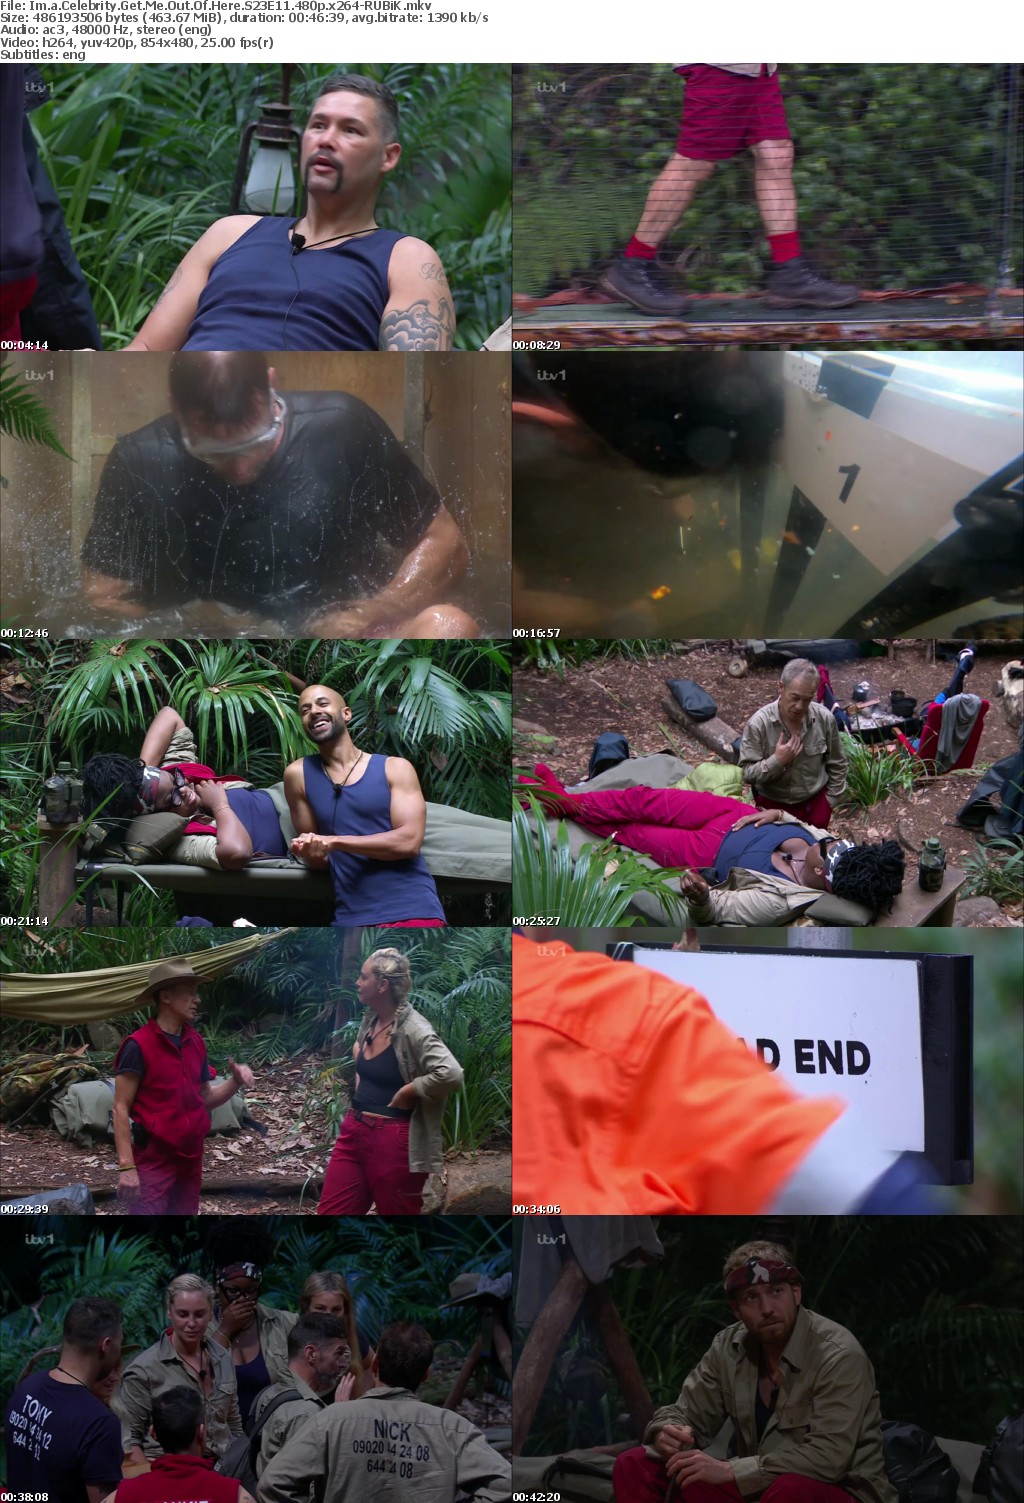 Im a Celebrity Get Me Out Of Here S23E11 480p x264-RUBiK